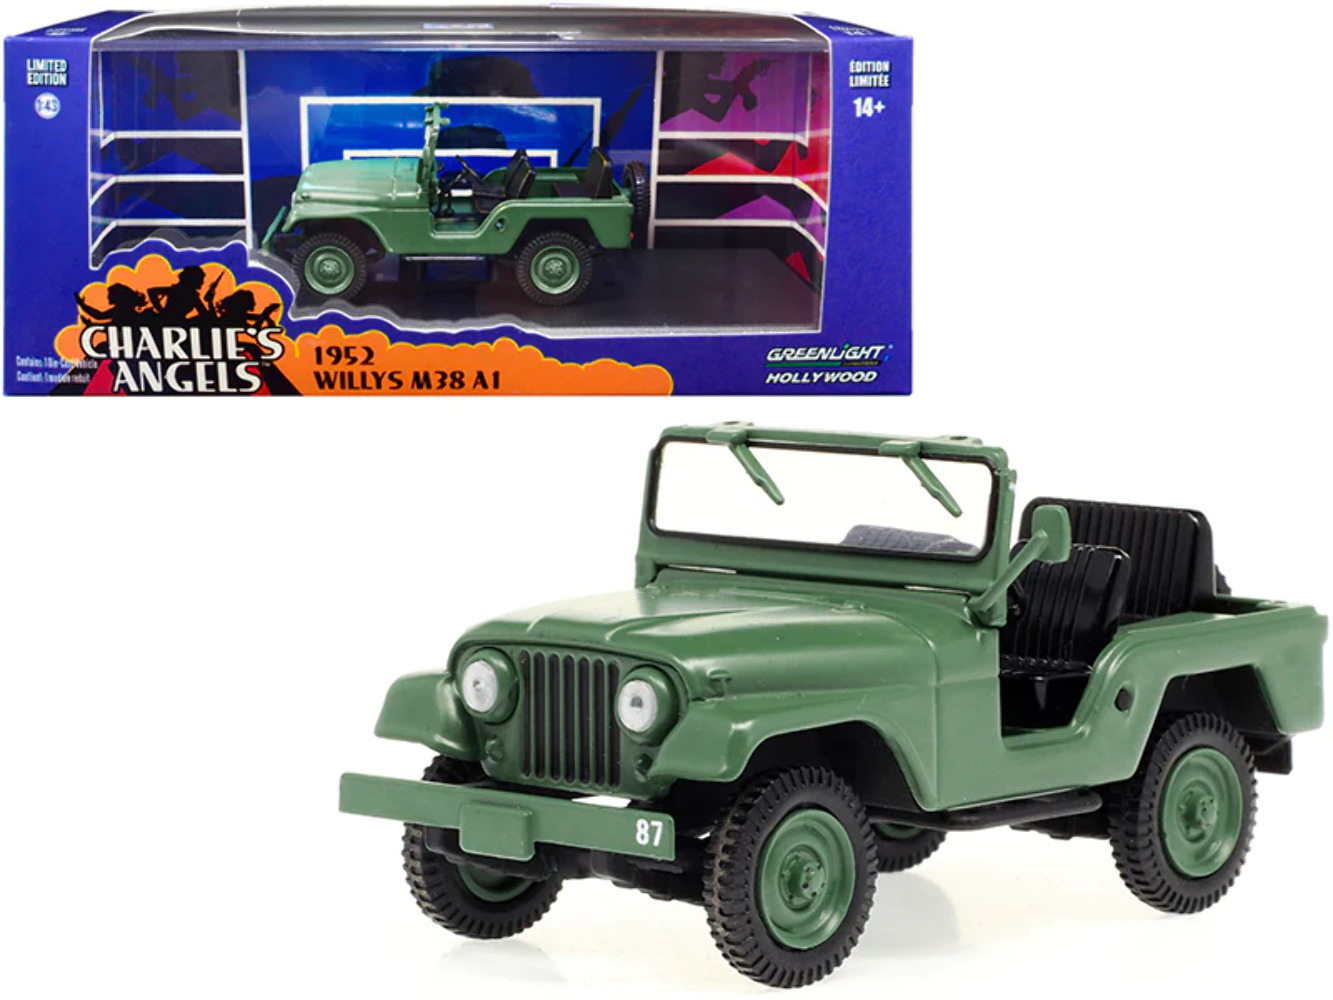 1952 Willys M38 A1 Charlies Angels 1976-1981 1/43 Diecast Model Car